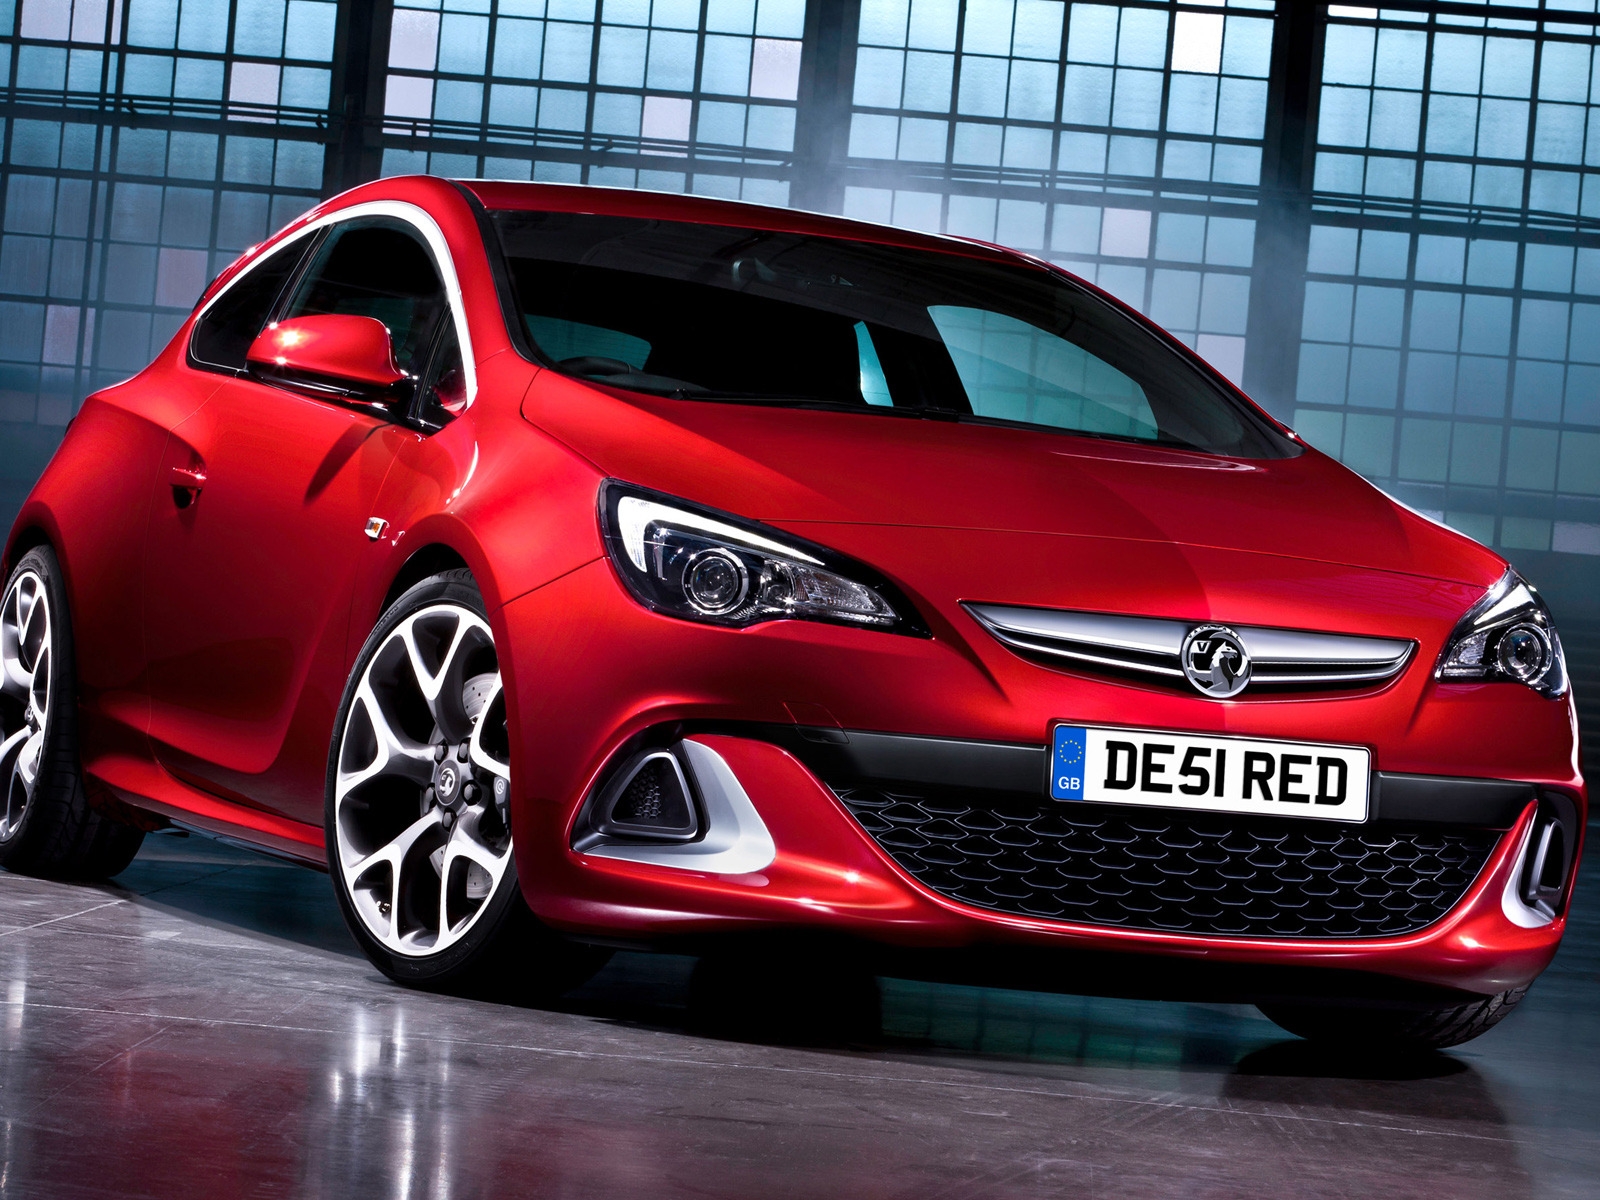 2012 Vauxhall Astra GTC for 1600 x 1200 resolution